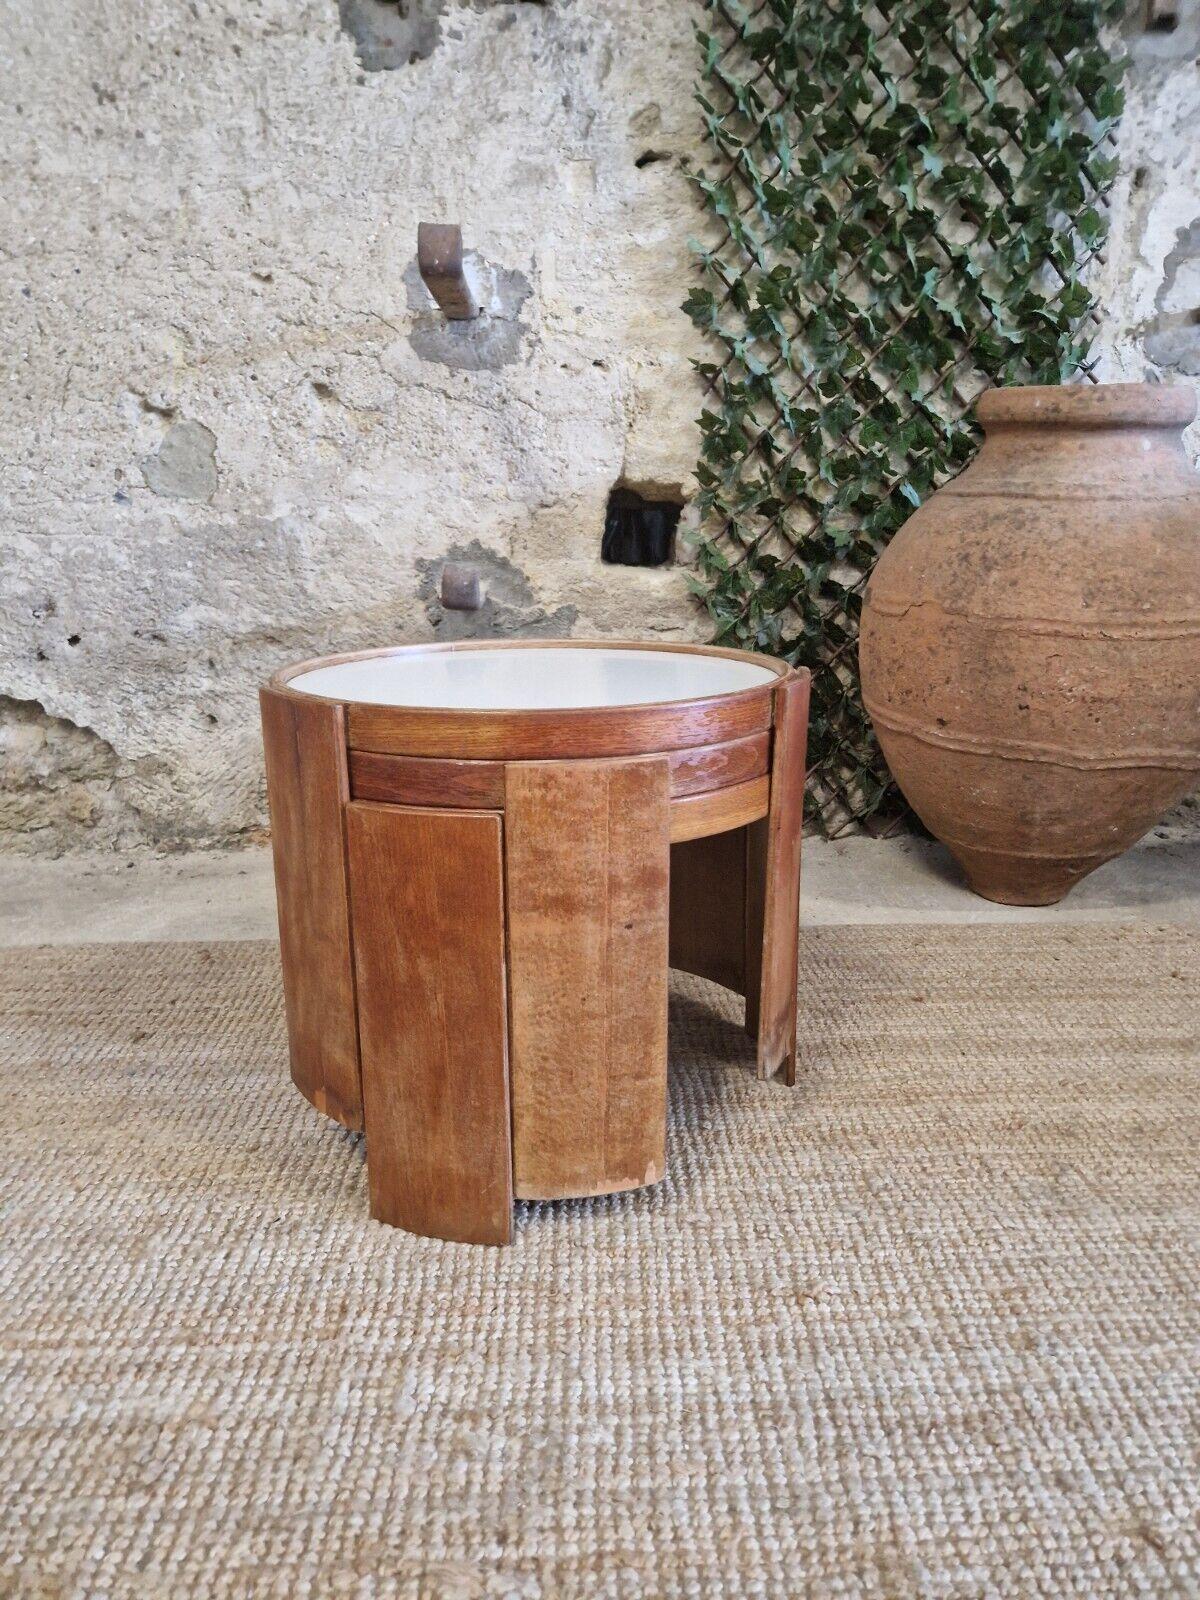 Vintage Nest of Tables Gianfranco Frattini 1926-2004 Model 780 In Good Condition For Sale In Buxton, GB